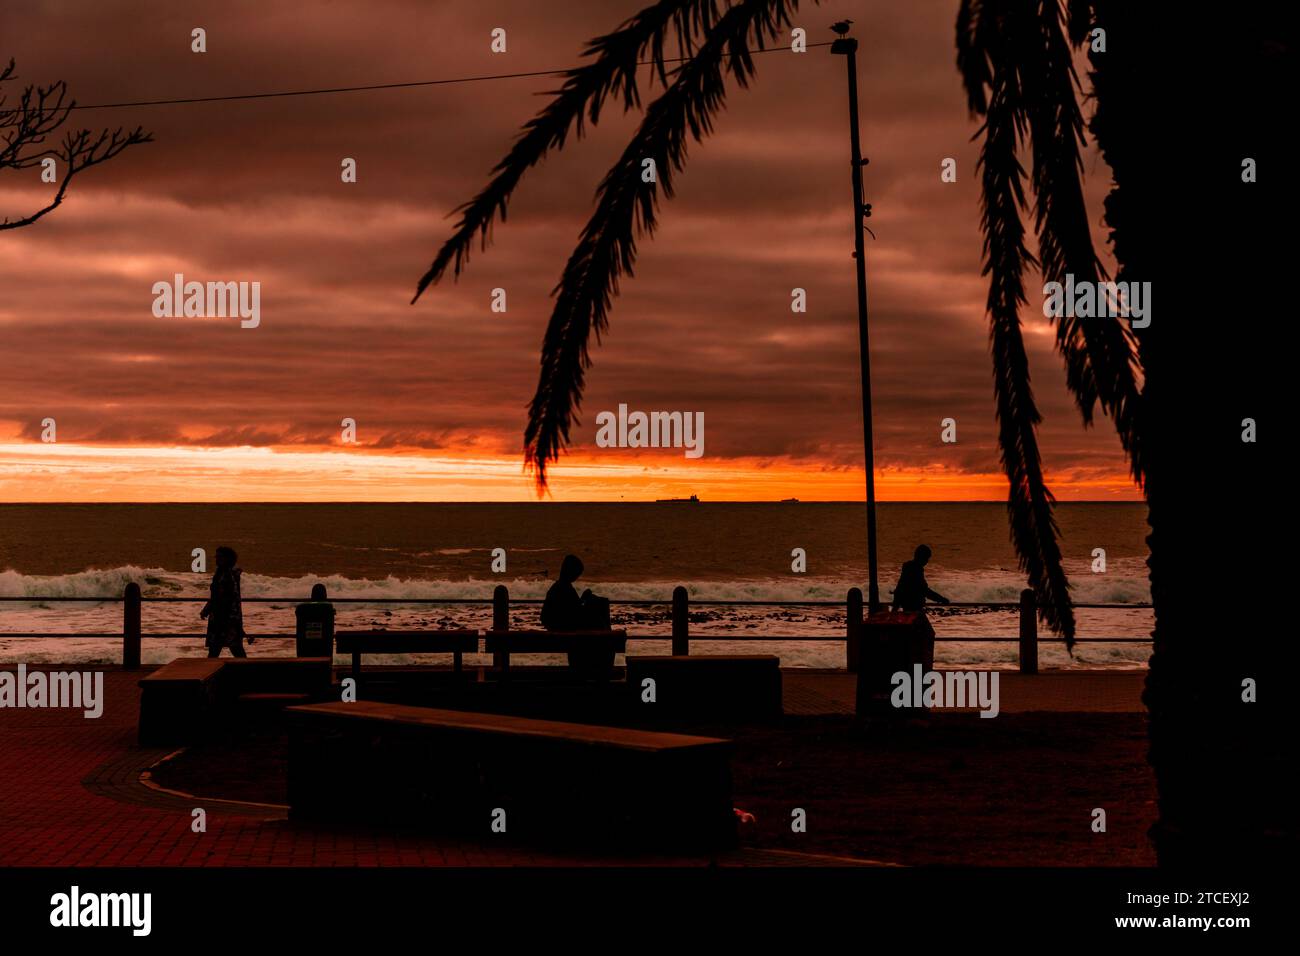 The sky lights up at sunset over the Atlantic as seen from the popular promenade off Sea Point, Cape Town, South Africa. Stock Photo